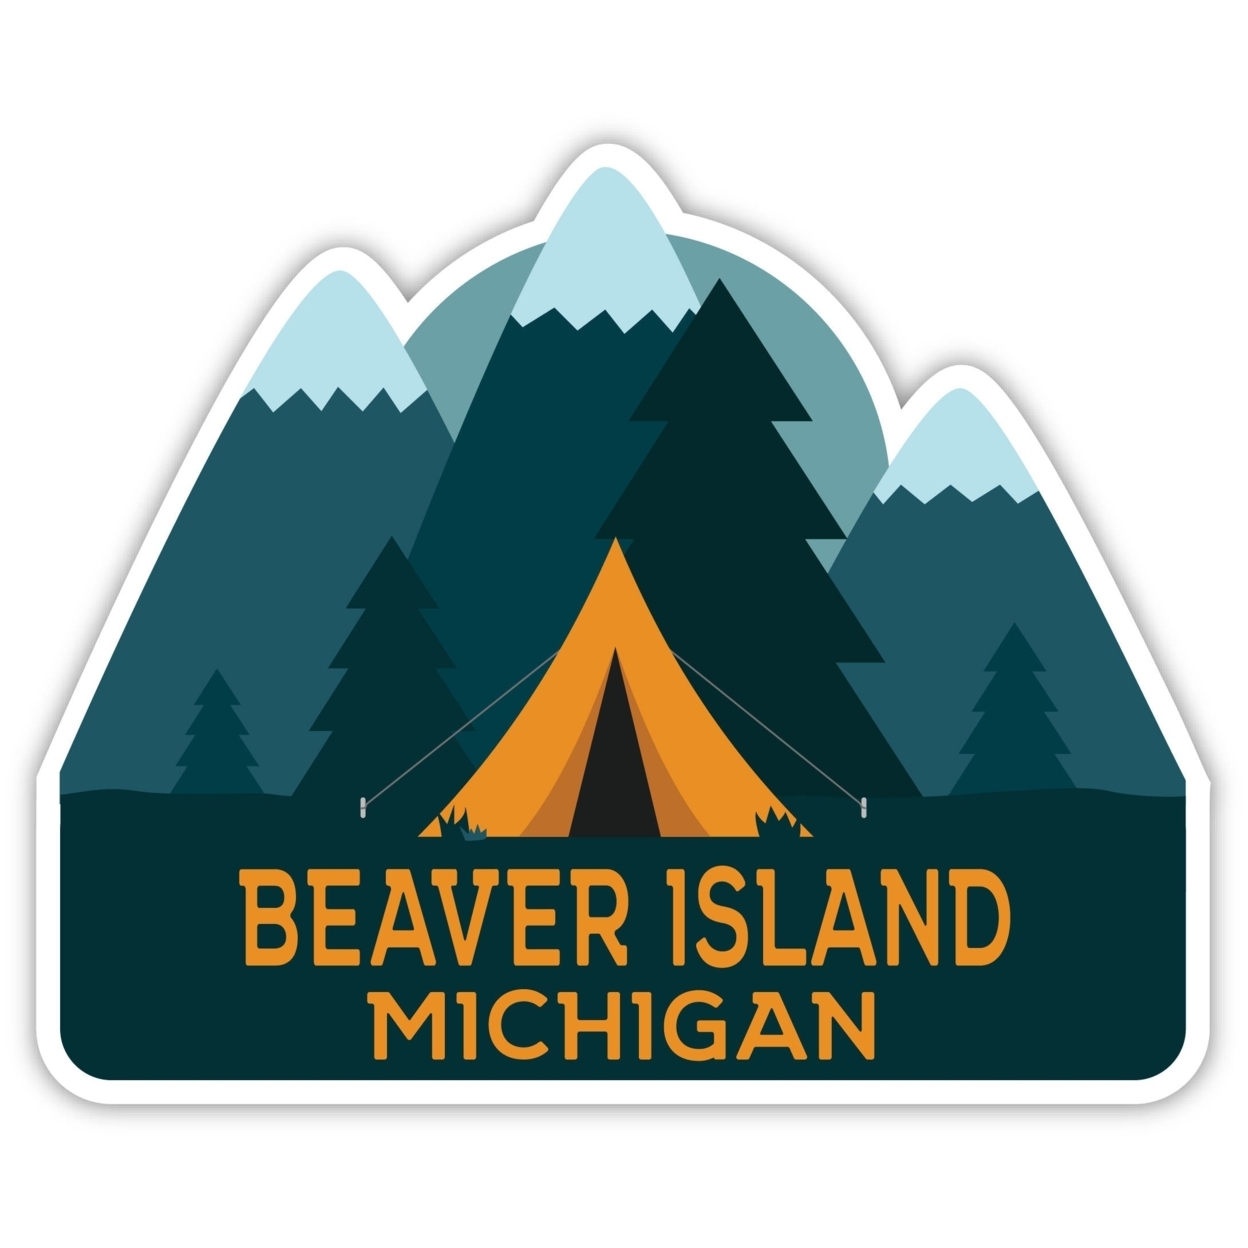 Beaver Island Michigan Souvenir Decorative Stickers (Choose Theme And Size) - 4-Pack, 8-Inch, Tent